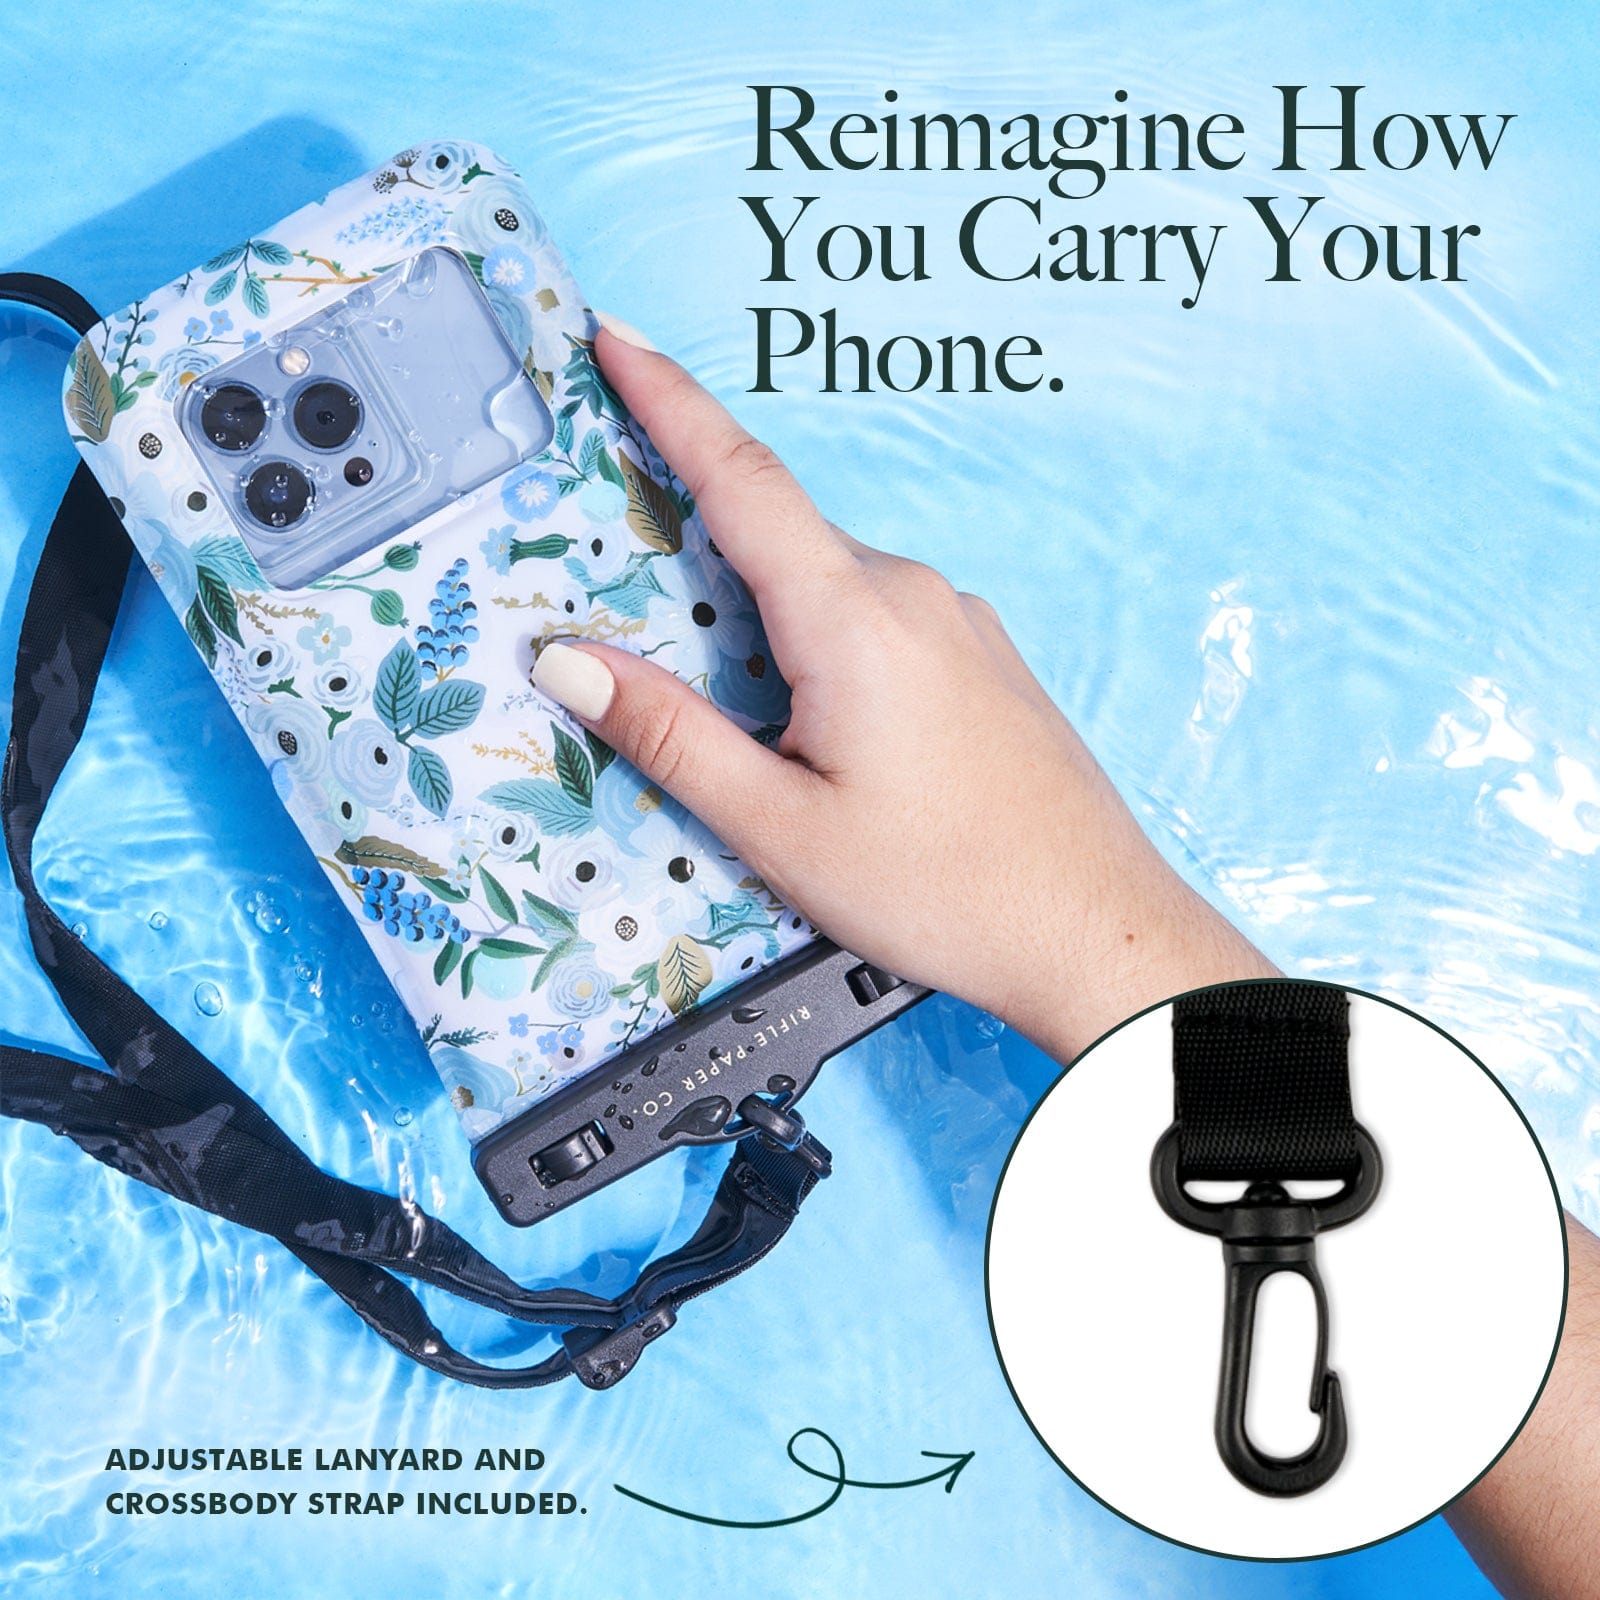 REIMAGINE HOW YOU CARRY YOUR PHONE. ADJUSTABLE LANYARD AND CROSSBODY STRAP INCLUDED. 